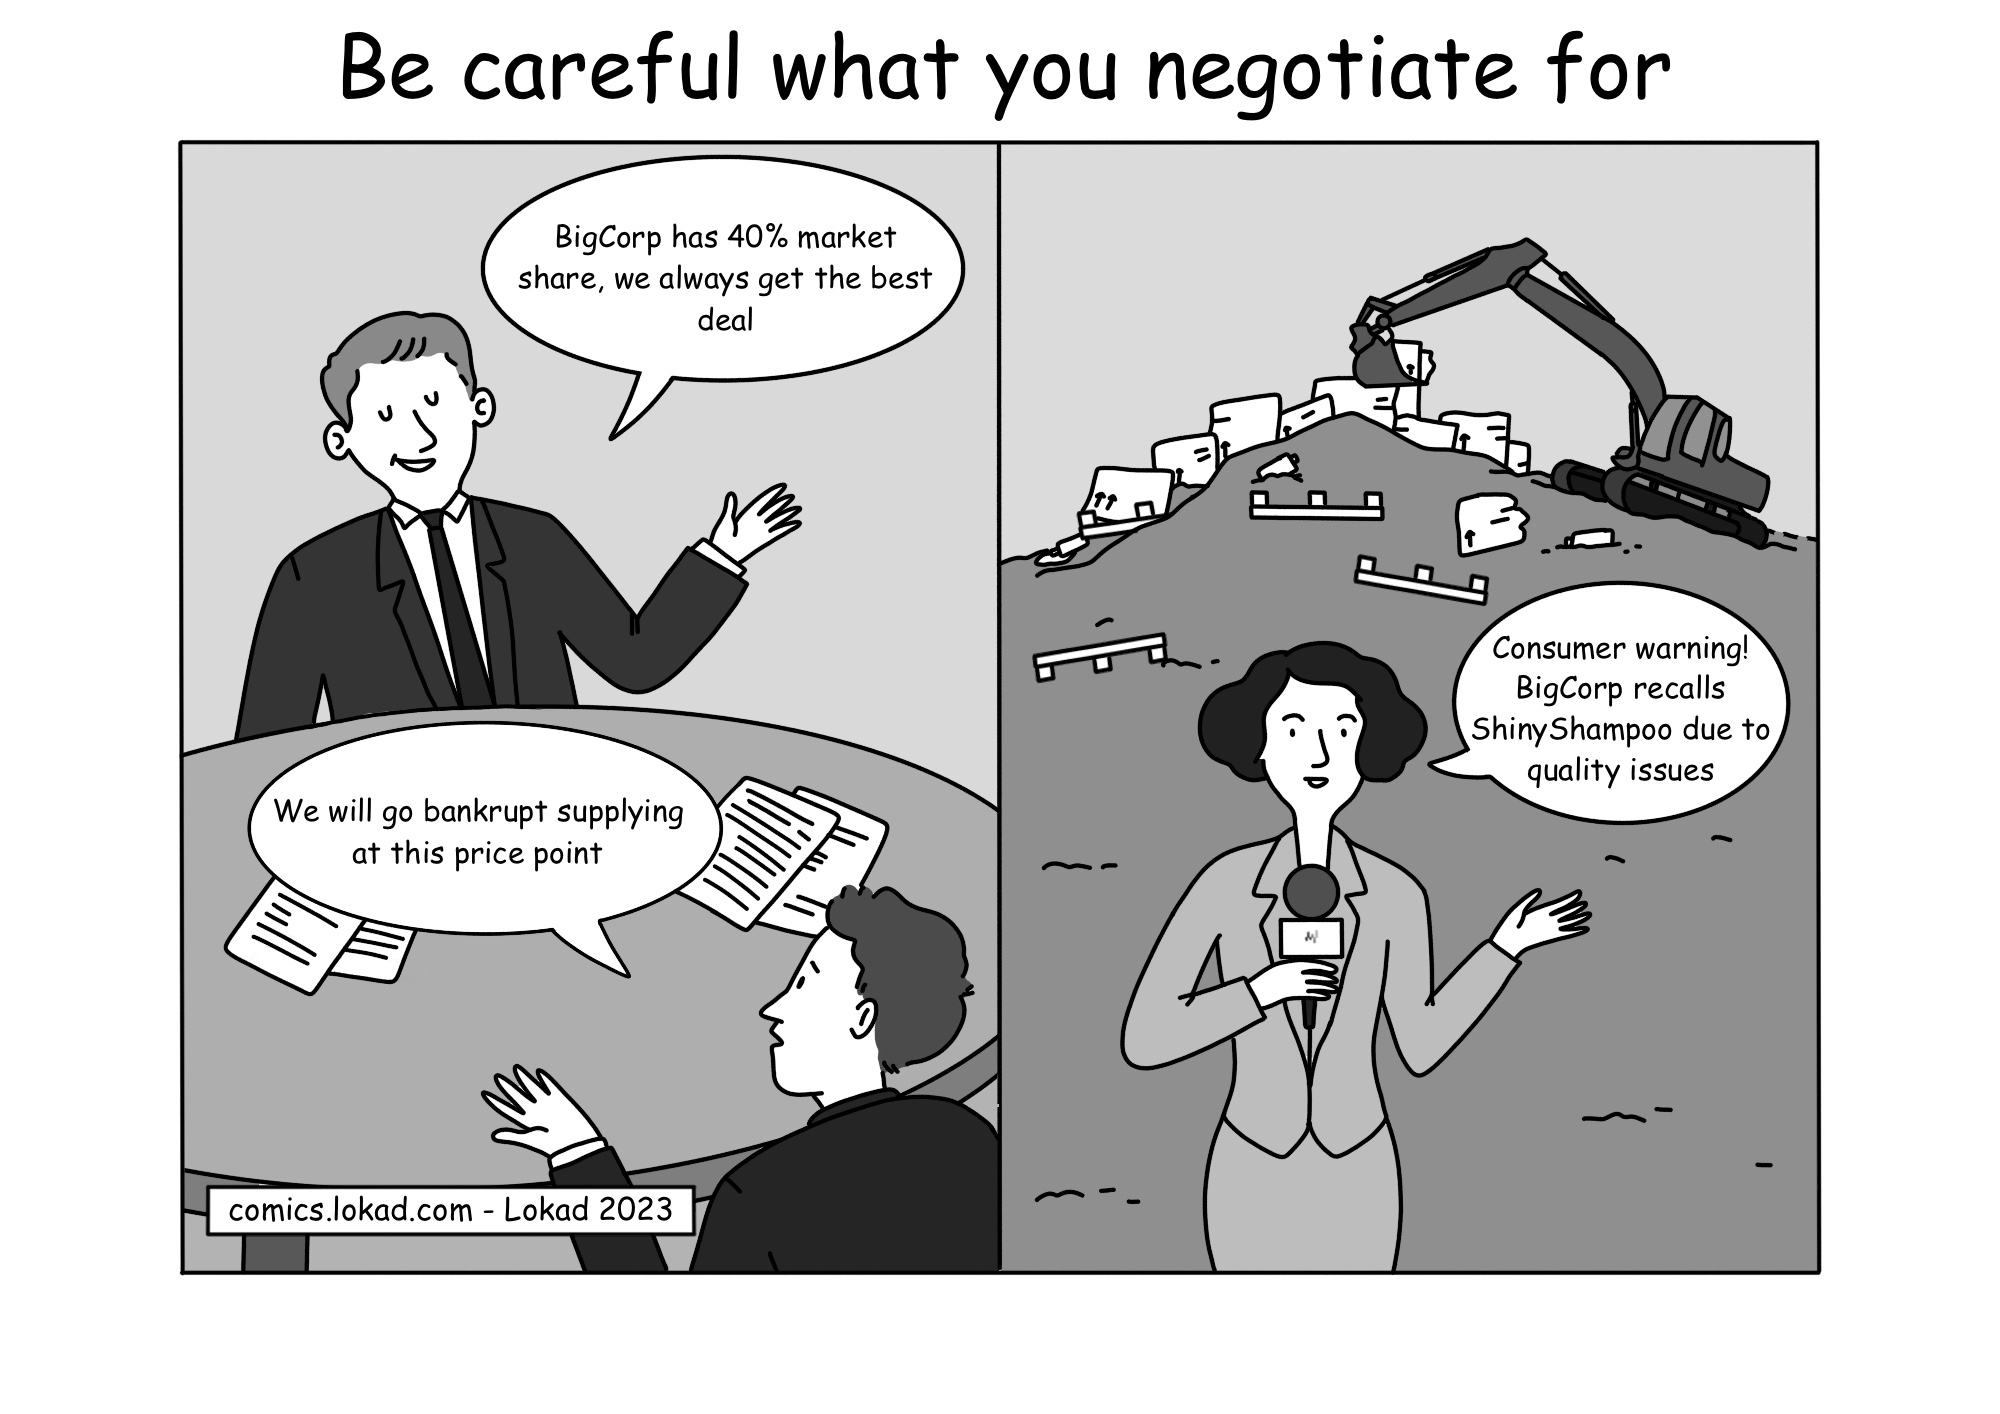 Be caferul what you negotiate for